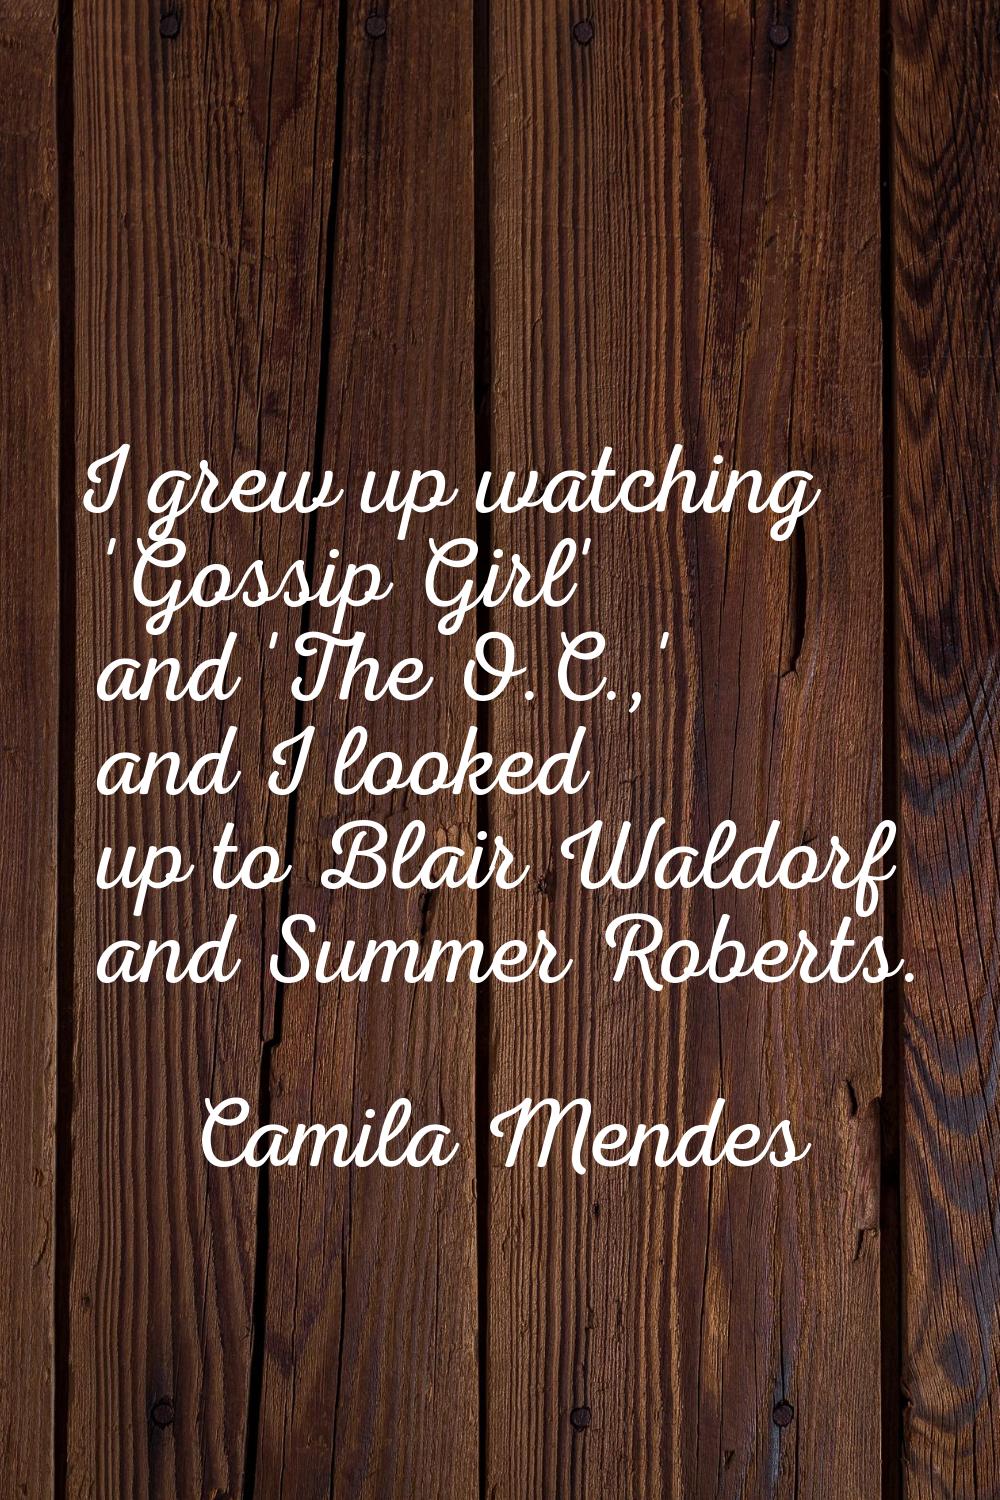 I grew up watching 'Gossip Girl' and 'The O.C.,' and I looked up to Blair Waldorf and Summer Robert